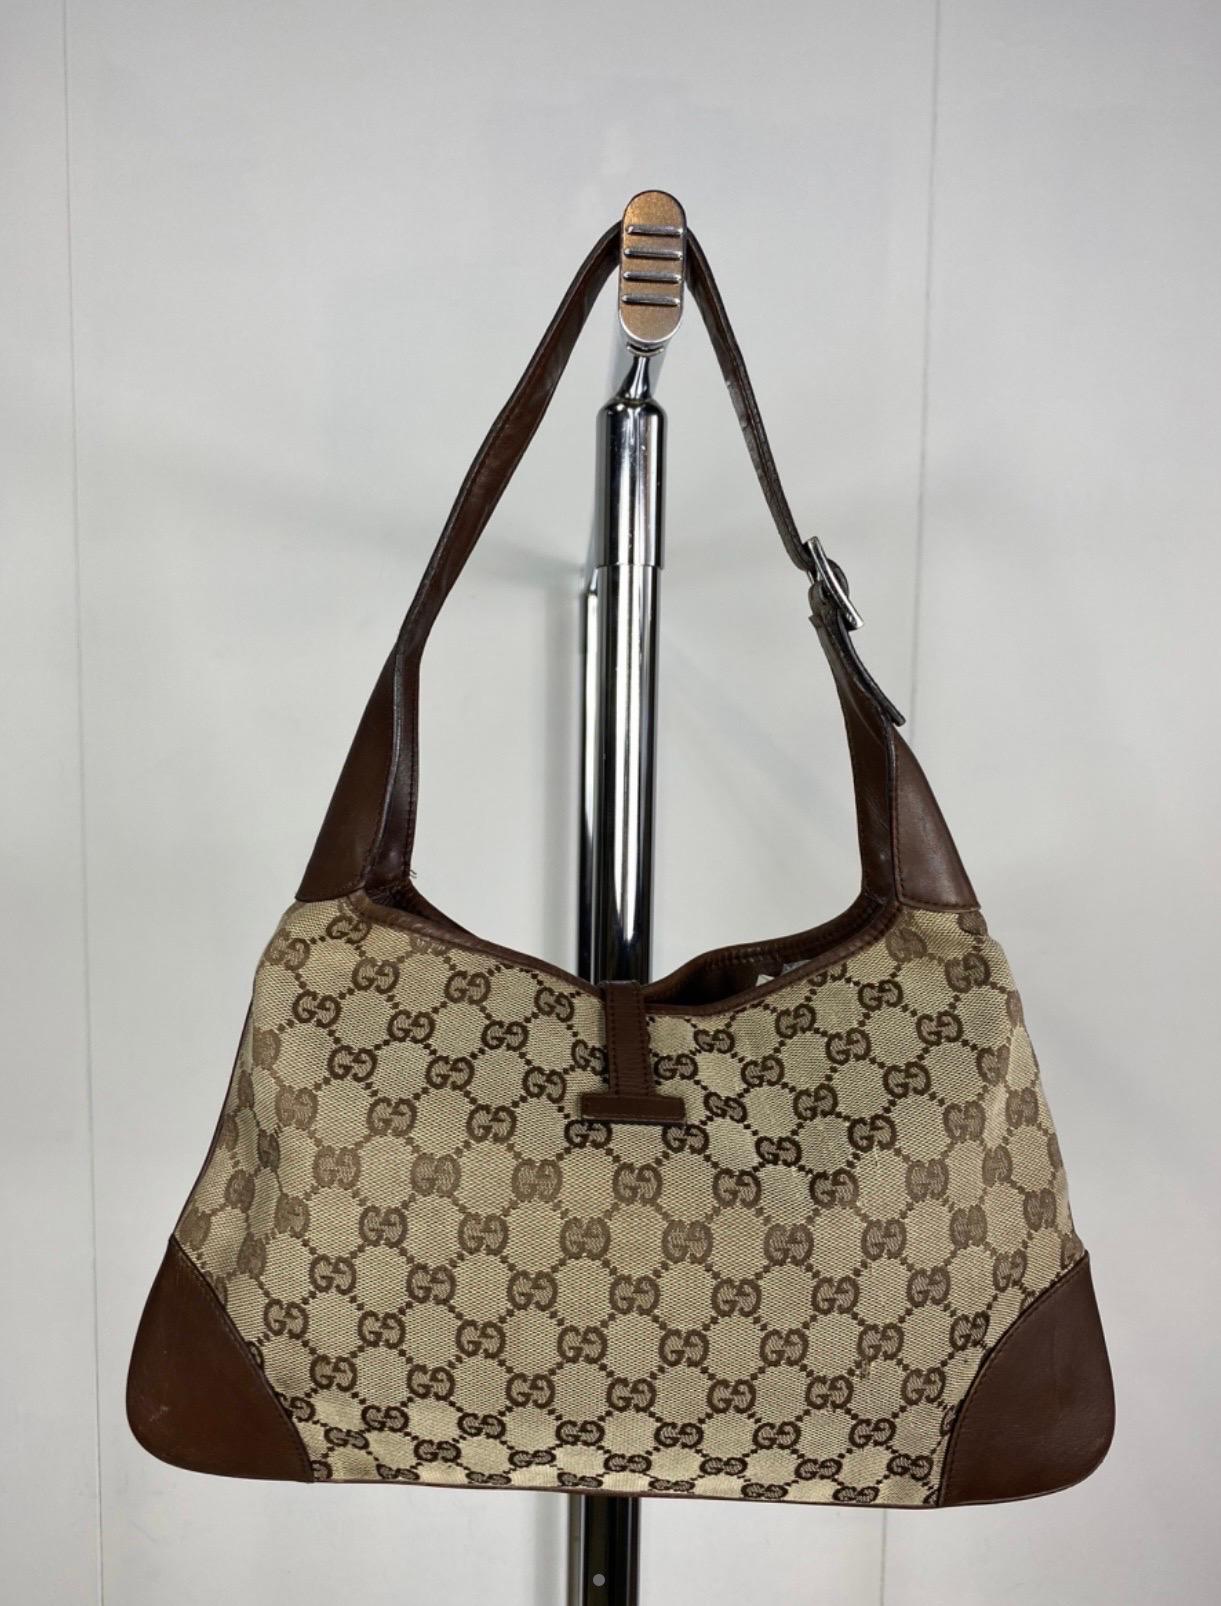 Gucci Jackie medium bag in brown-toned monogram fabric, brown leather corners and shoulder strap finishing, there are signs of time and wear as shown in the attached photos, dimensions: length 33cm, height 22cm.
Good conditions.